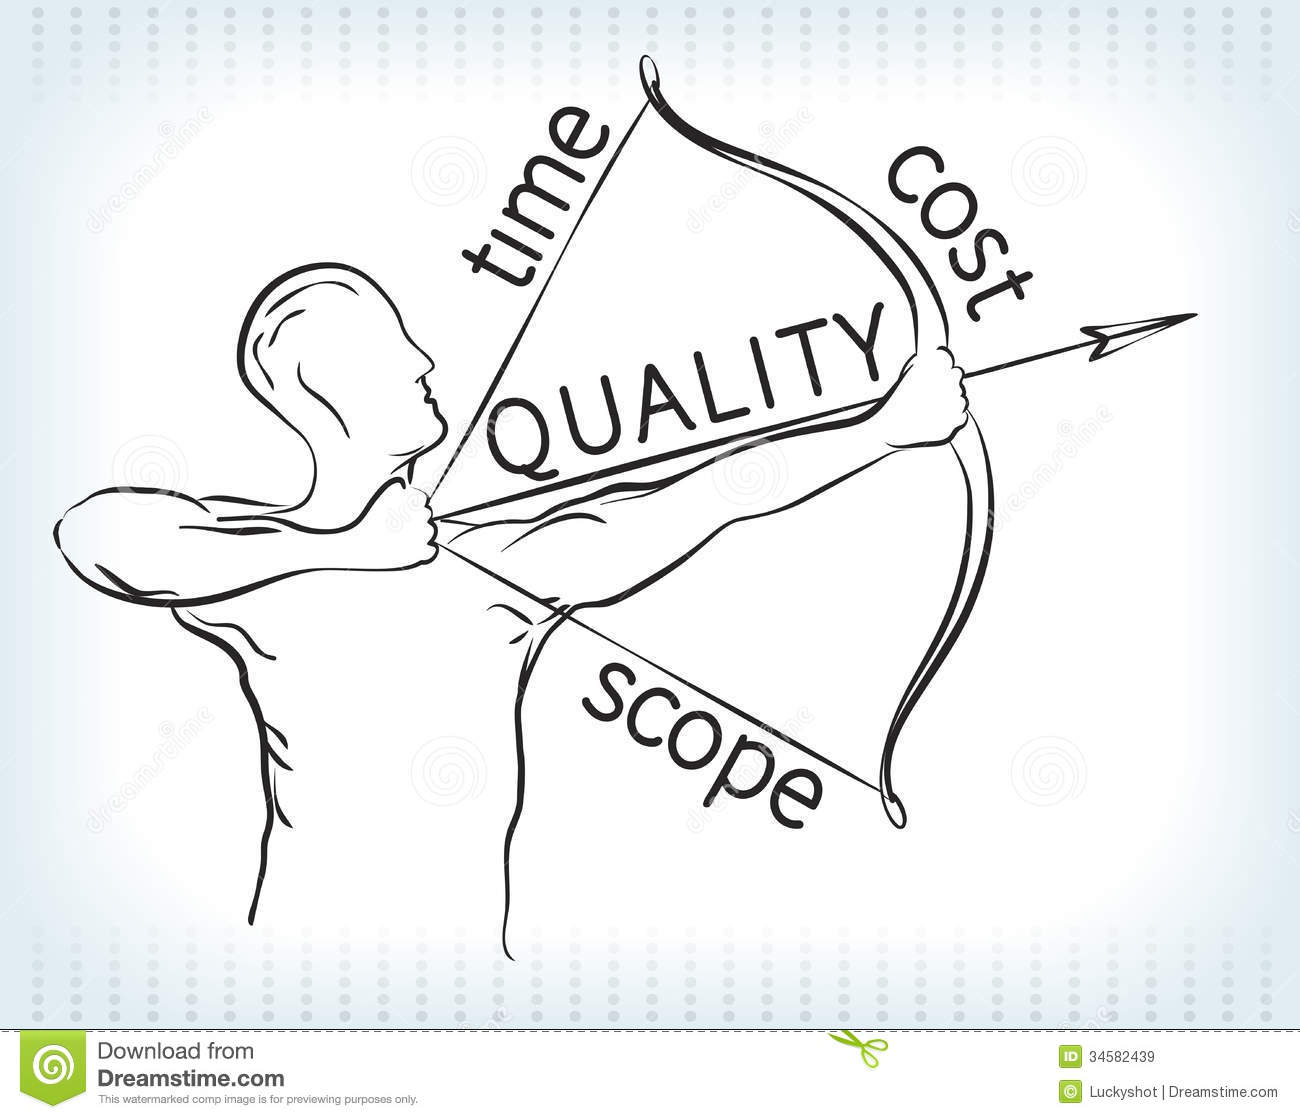 Project Management Triangle Archer Royalty Free Stock Images   Image